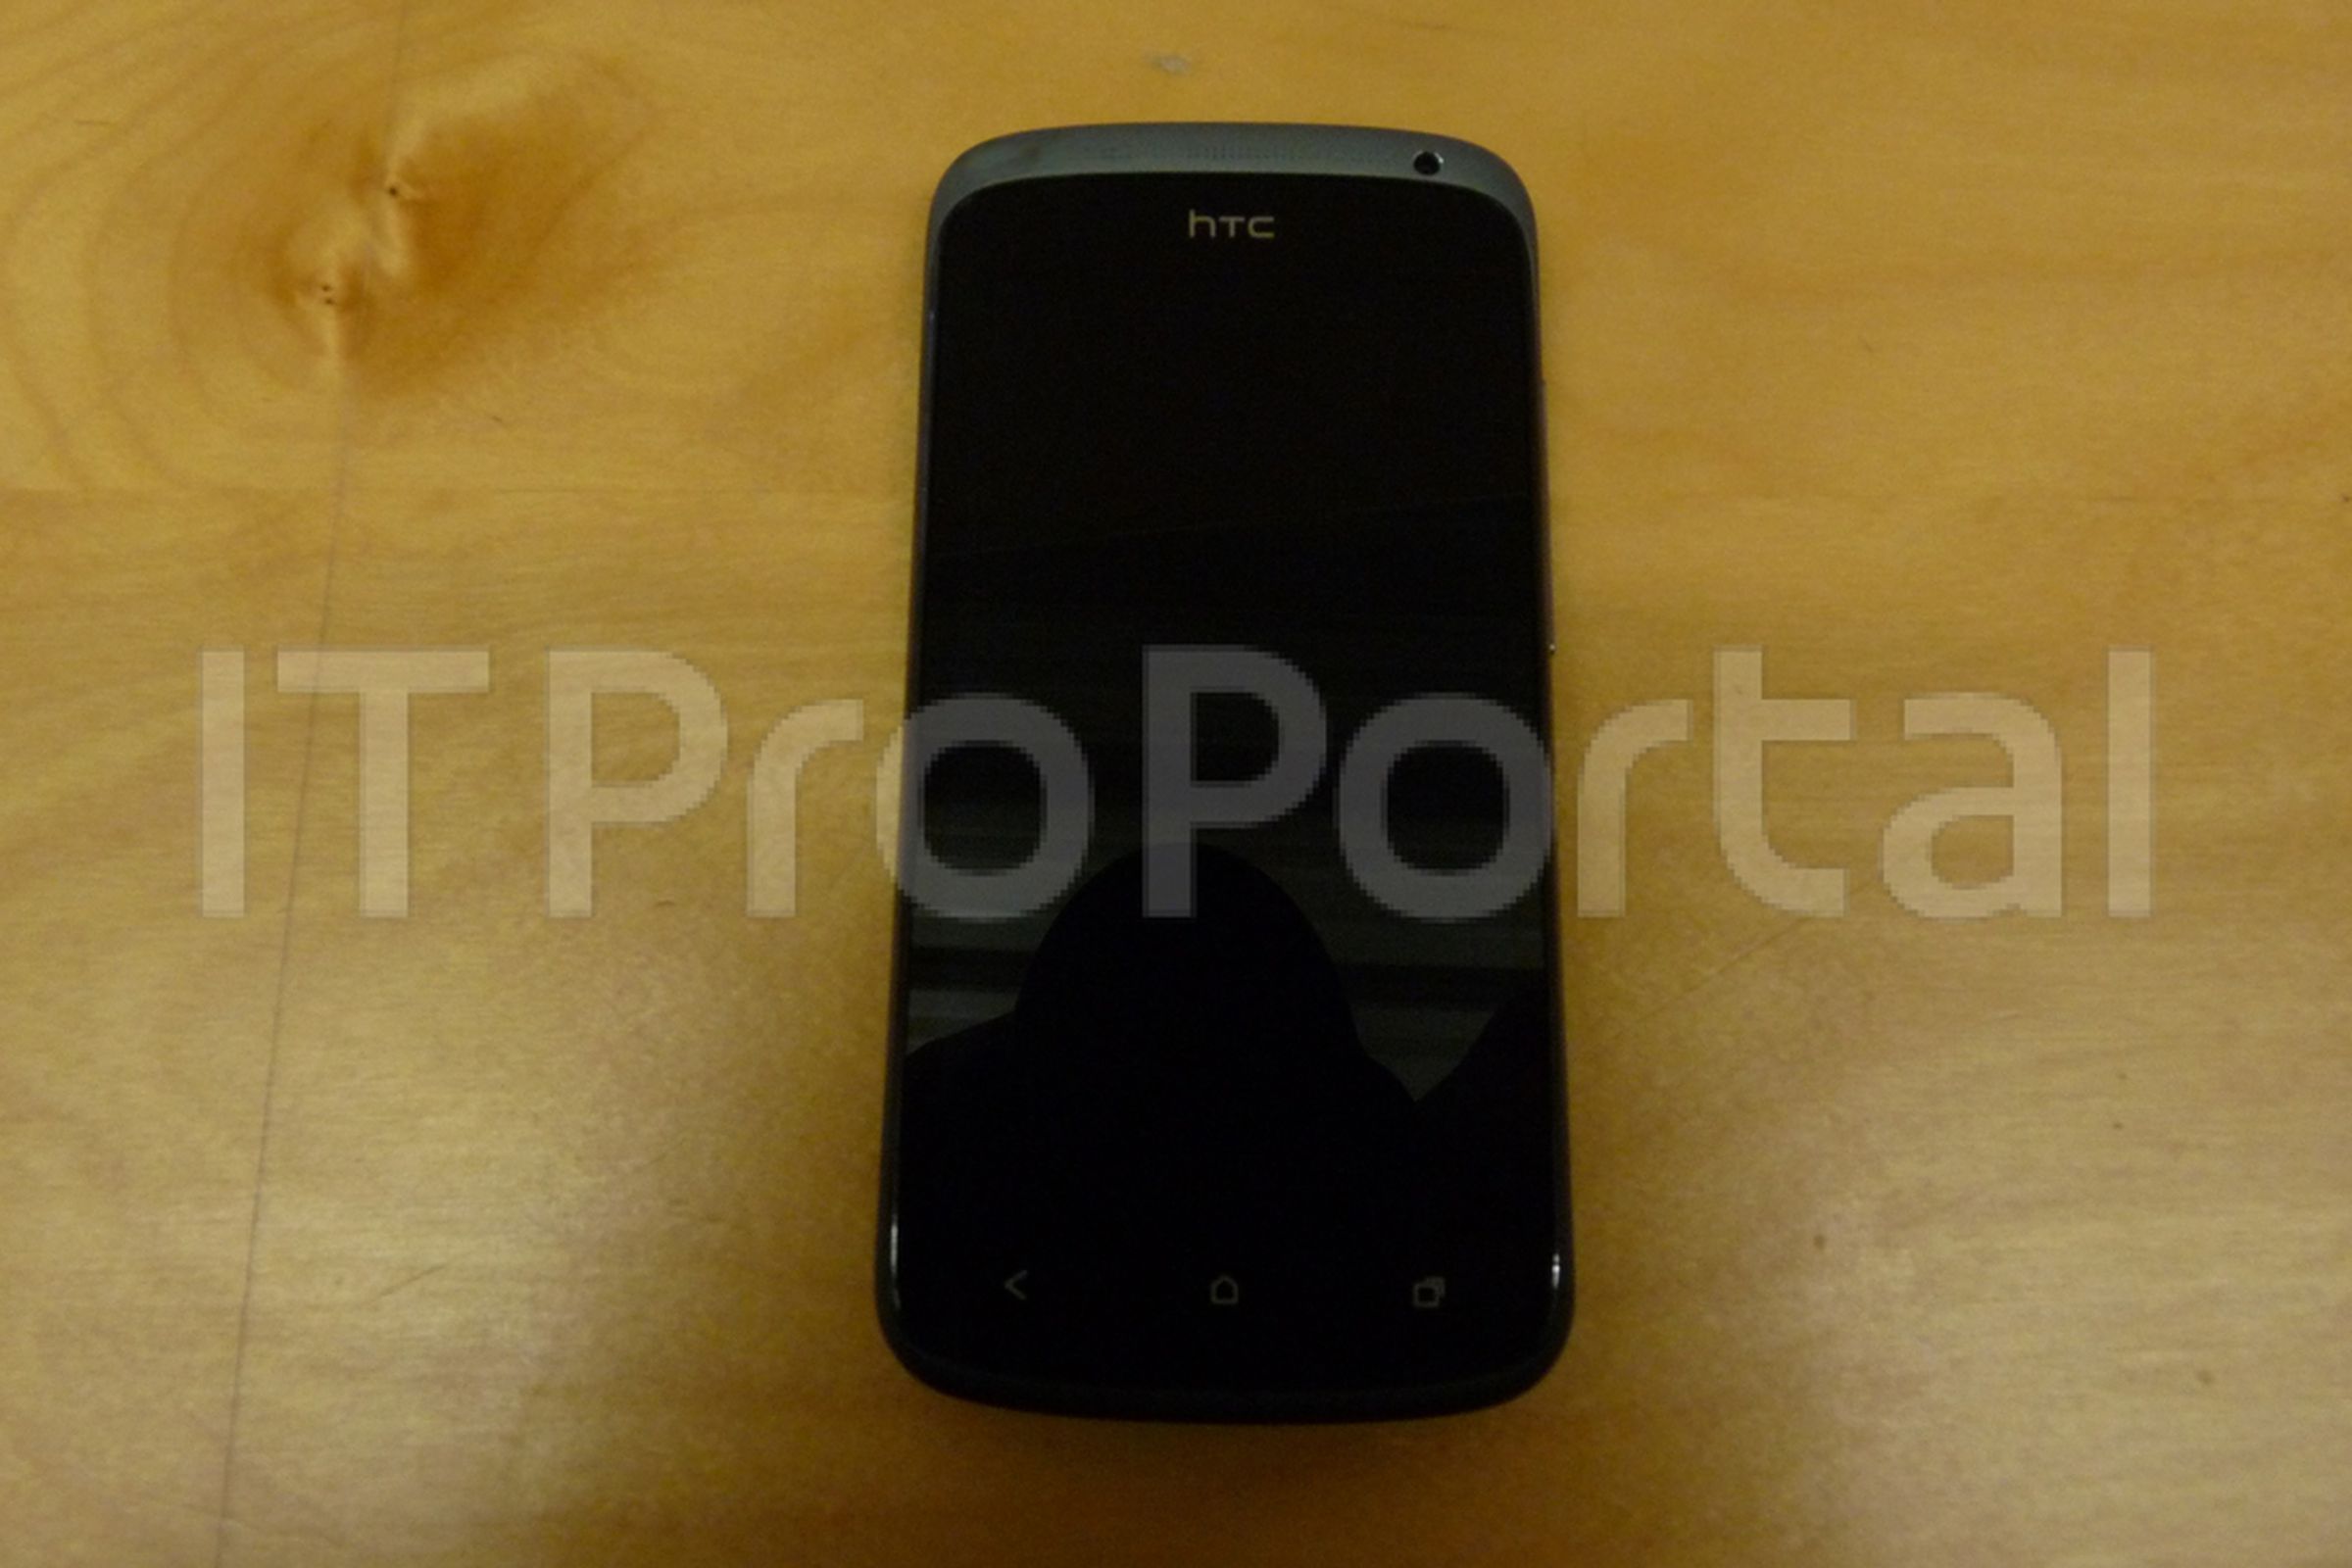 HTC One X One S leaked image ITProPortal